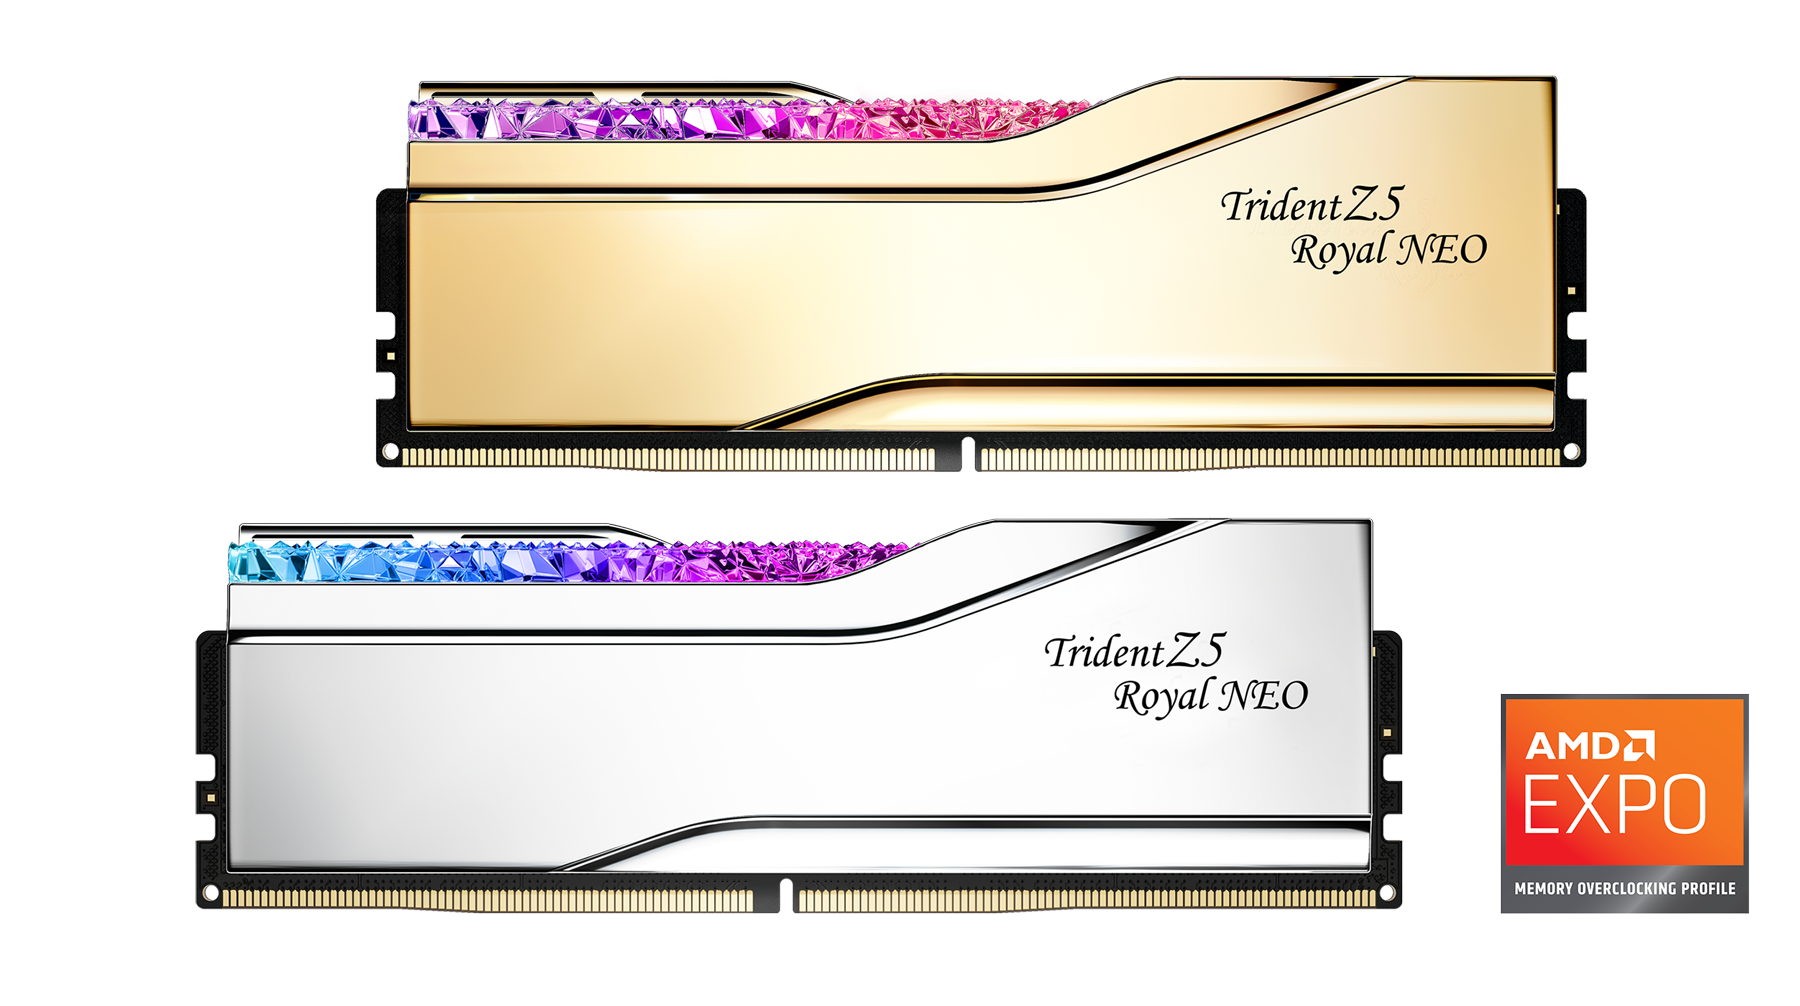 G.Skill Unveils Trident Z5 Royal Neo DDR5 Memory Kits: AMD EXPO Support, Up To DDR5-8000 & Ready For Ryzen 9000 CPUs 2